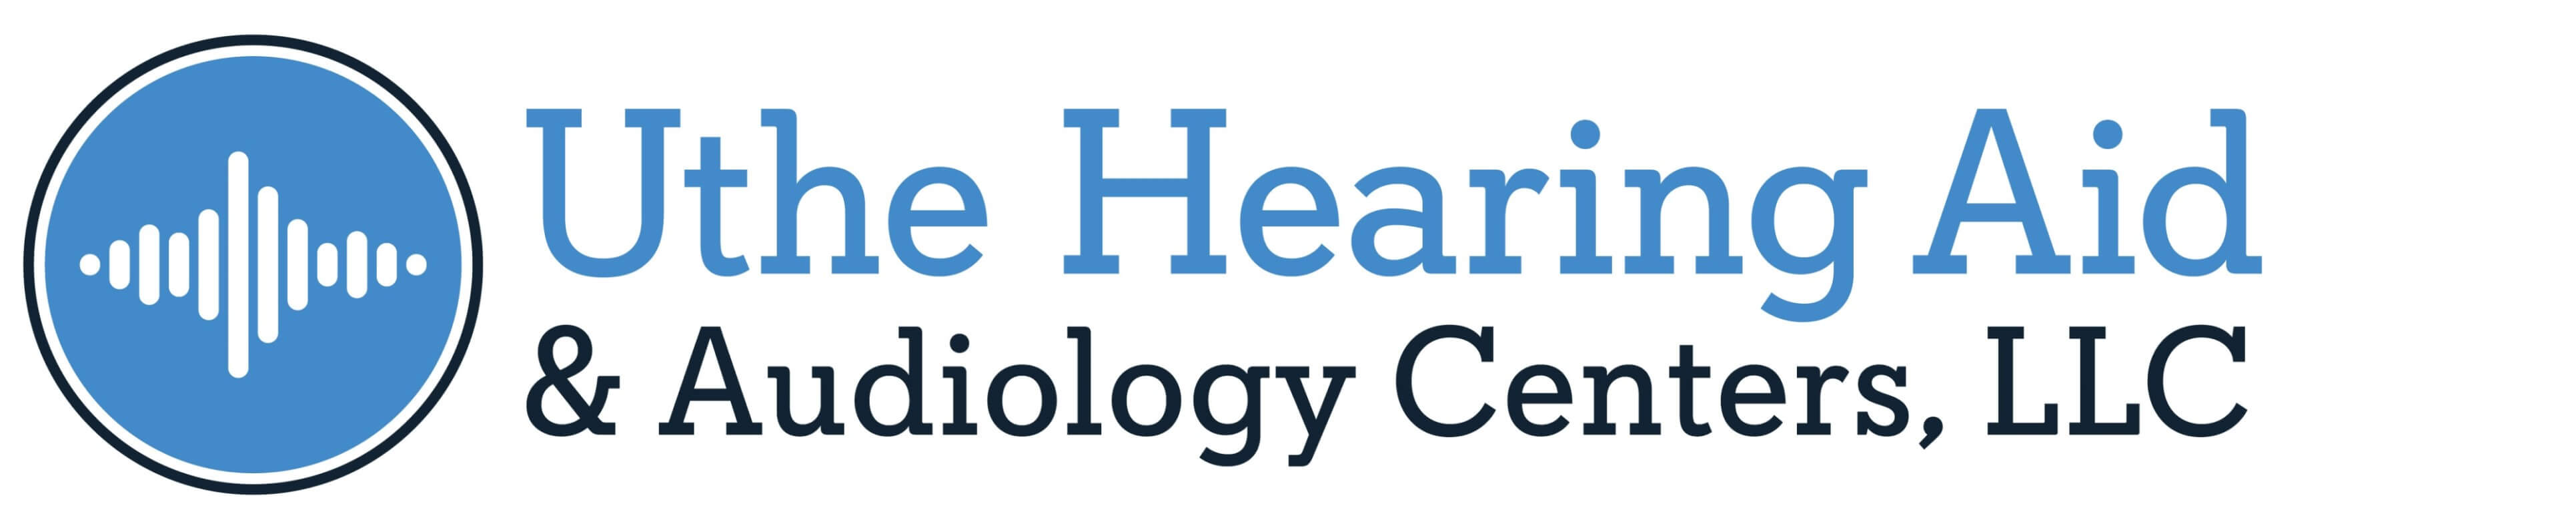 Uthe Hearing Aid and Audiology Centers, LLC logo